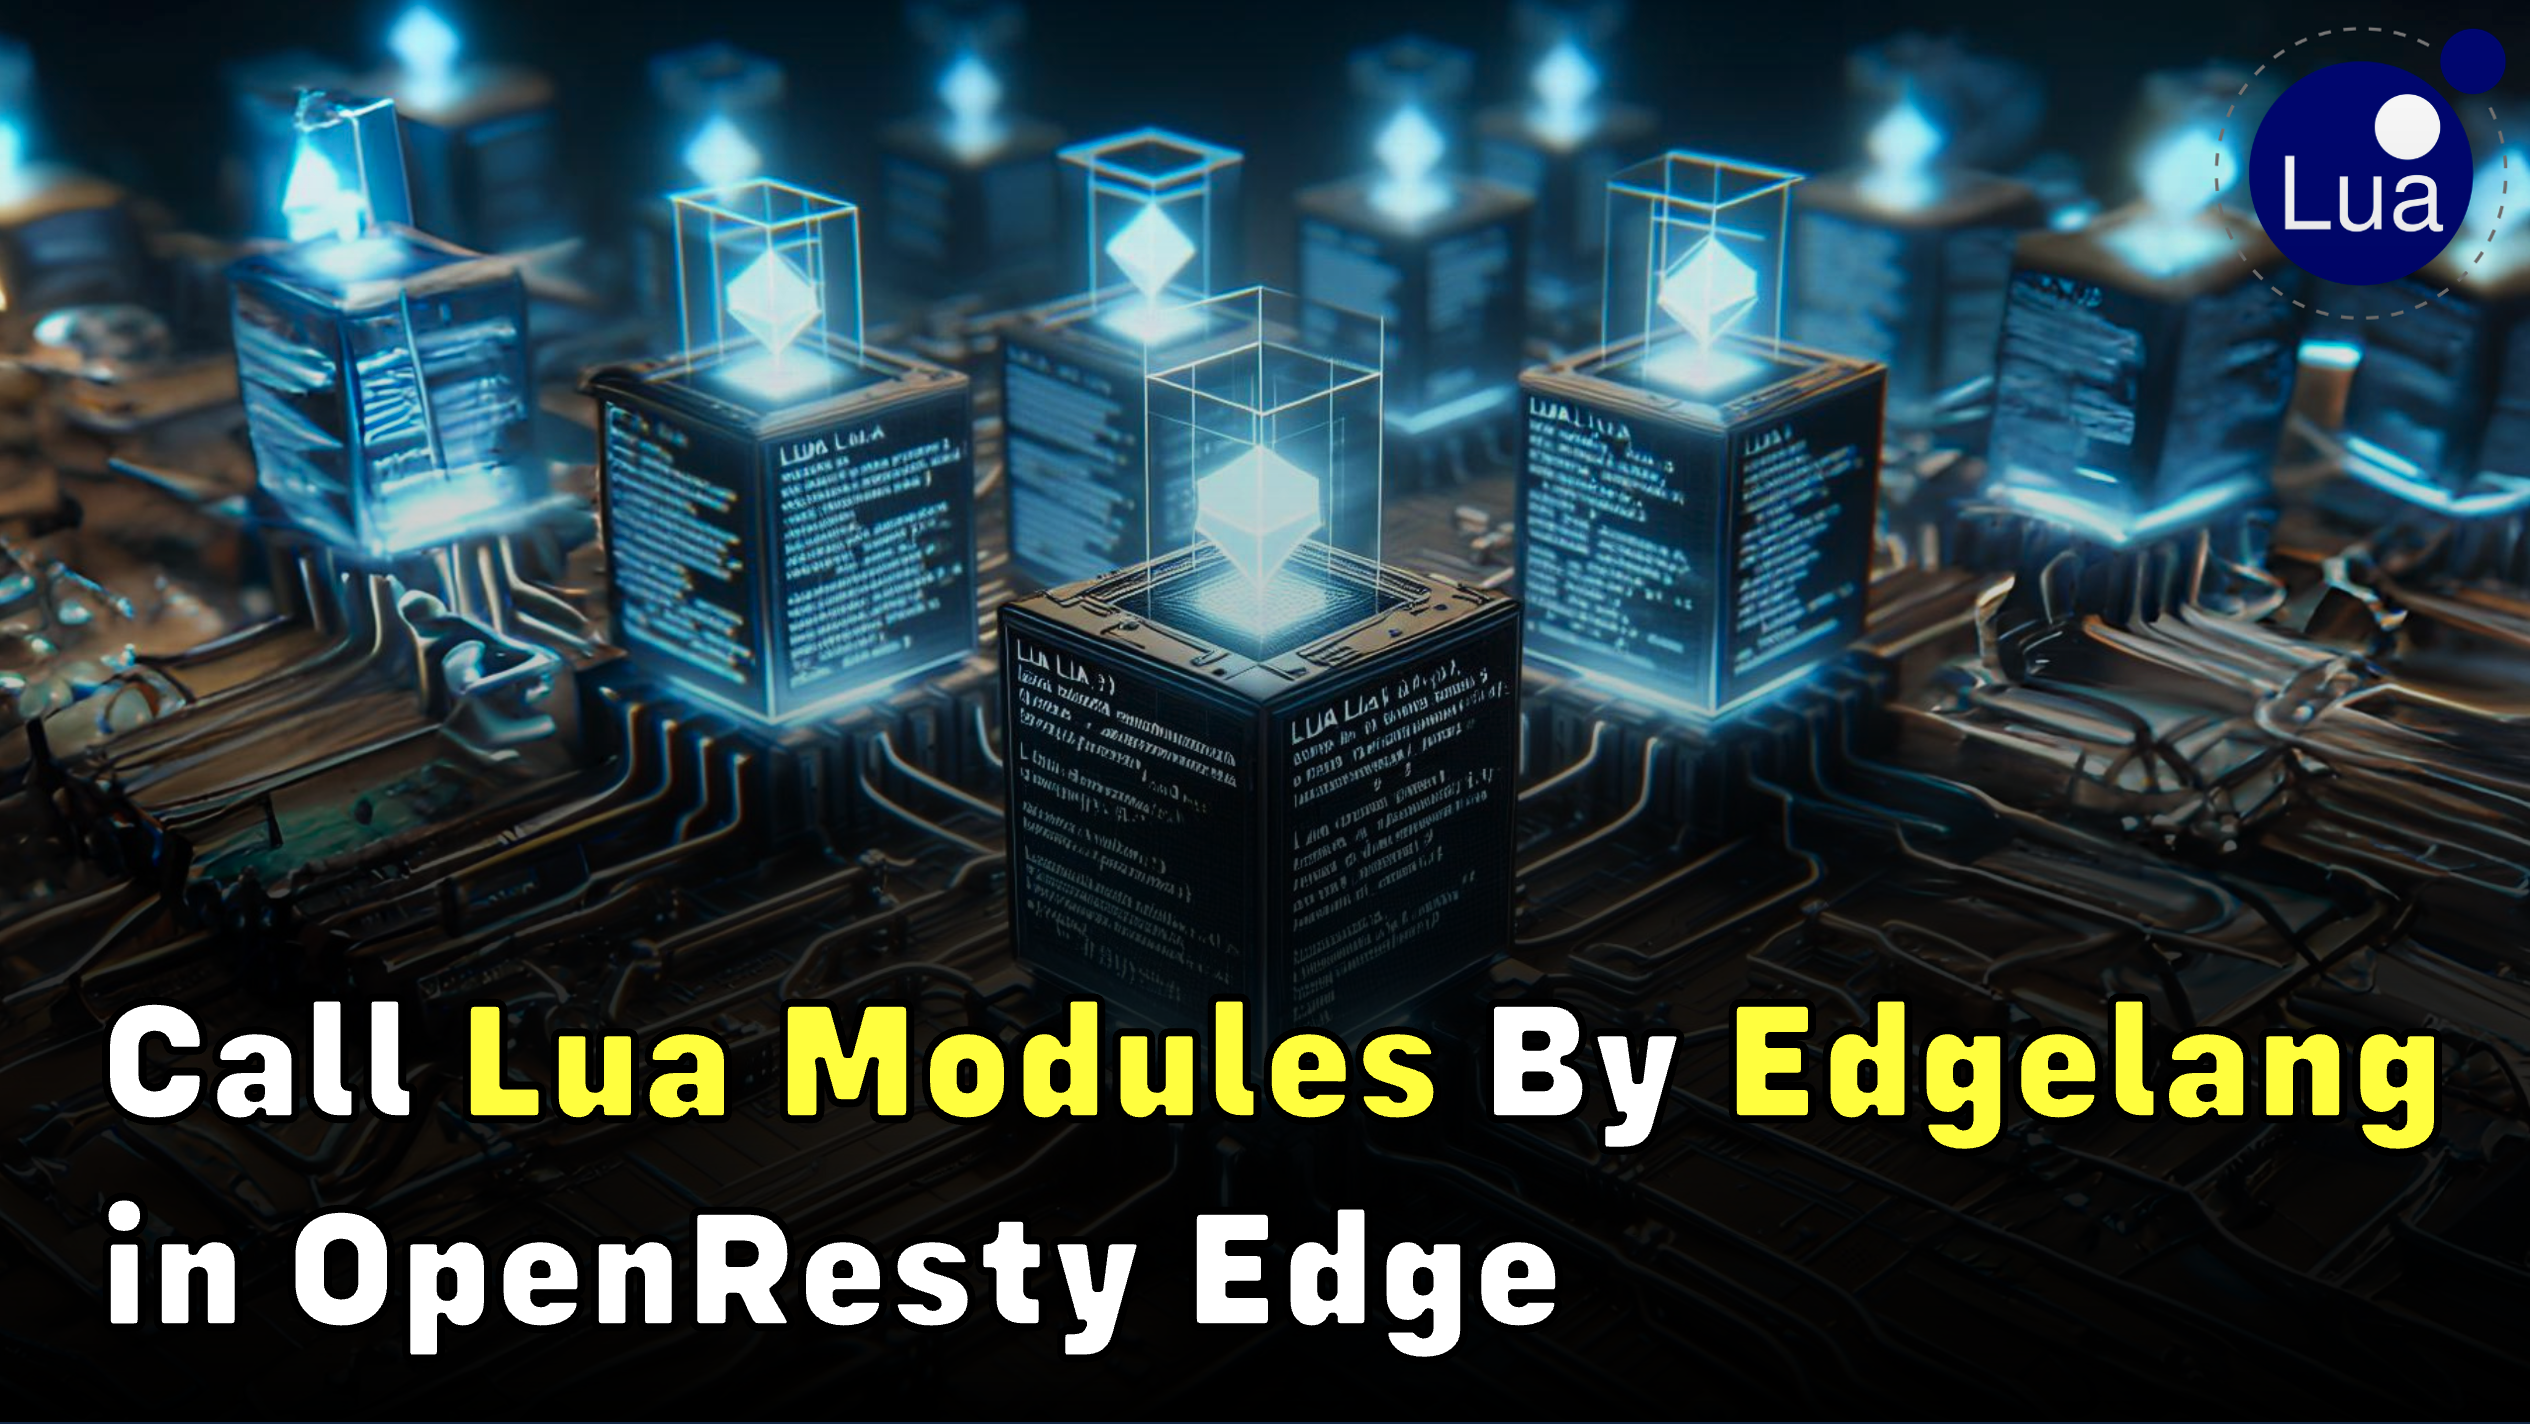 Call Lua modules by Edgelang in OpenResty Edge